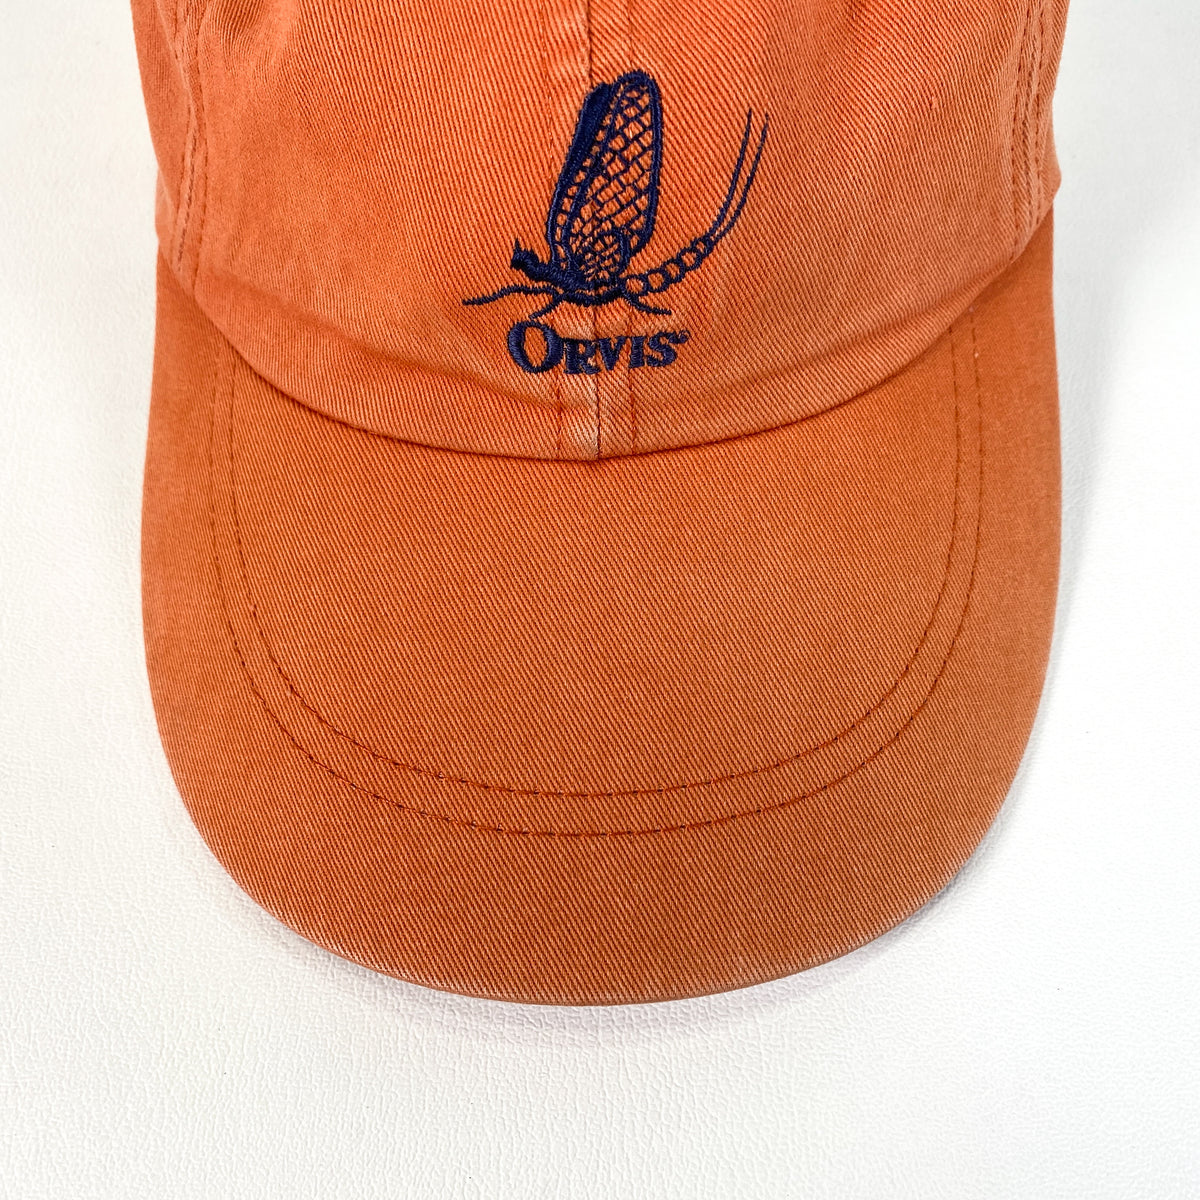 Vintage 90's Orvis Fly Fishing Made in USA Hat – CobbleStore Vintage